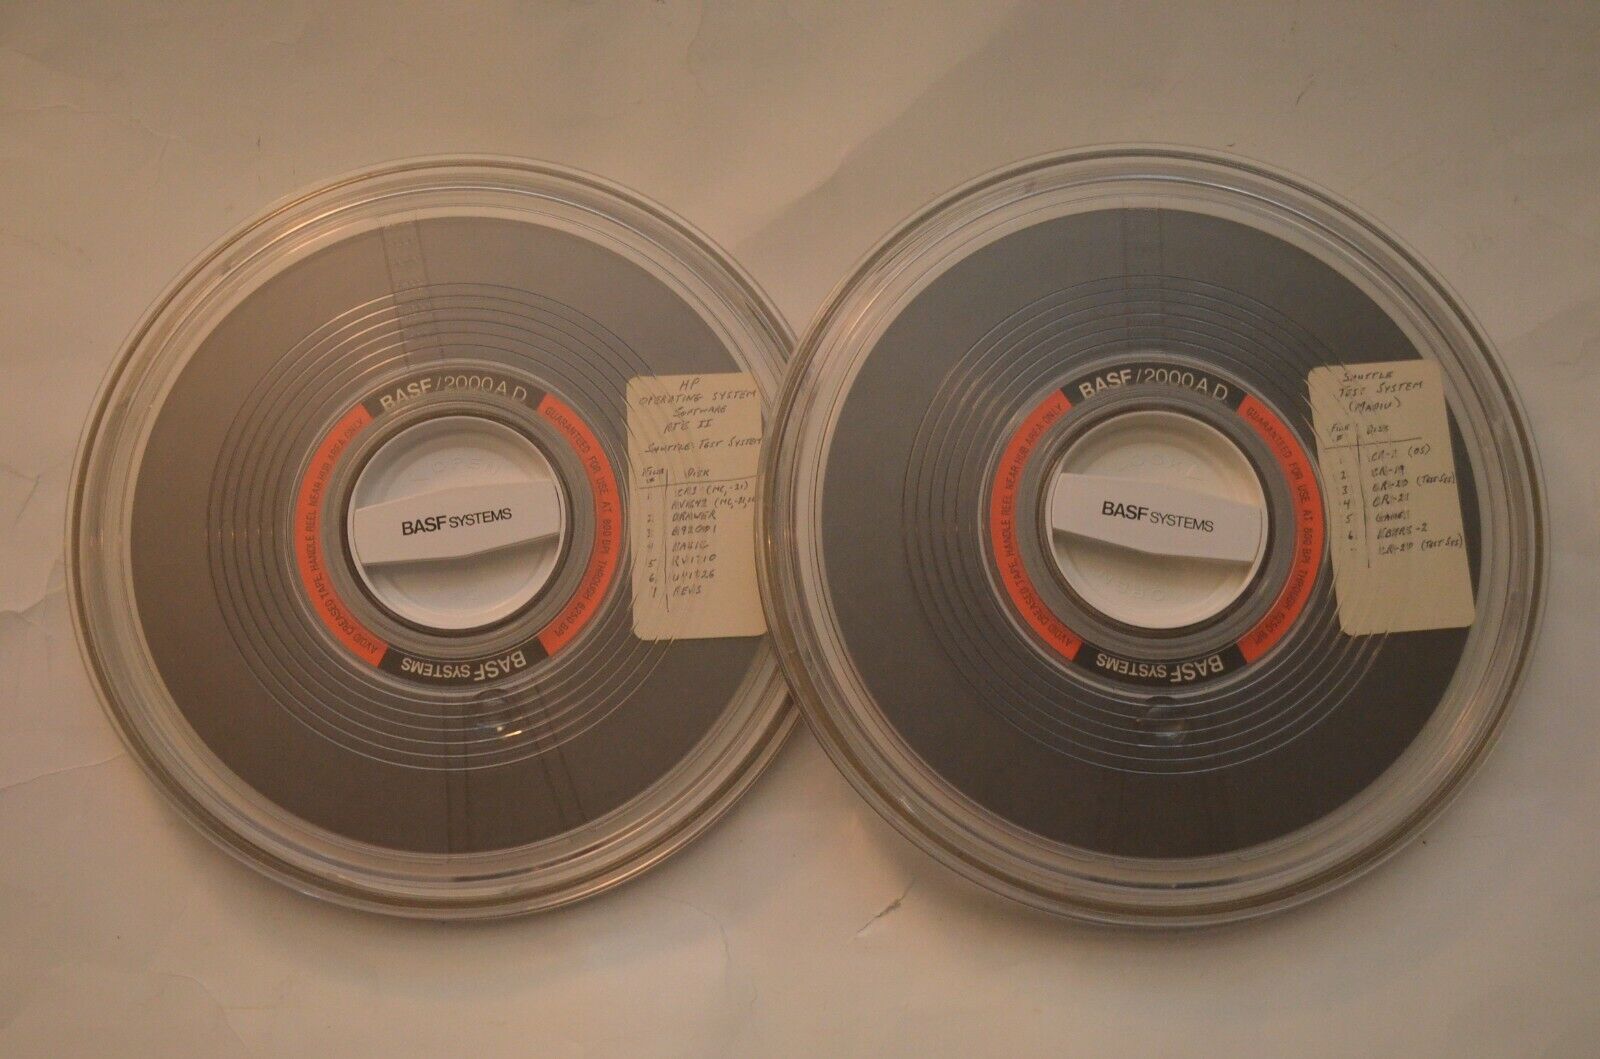 Lot of (2) Genuine BASF 9-Track Reel Tapes W/Outer Plastic Cases